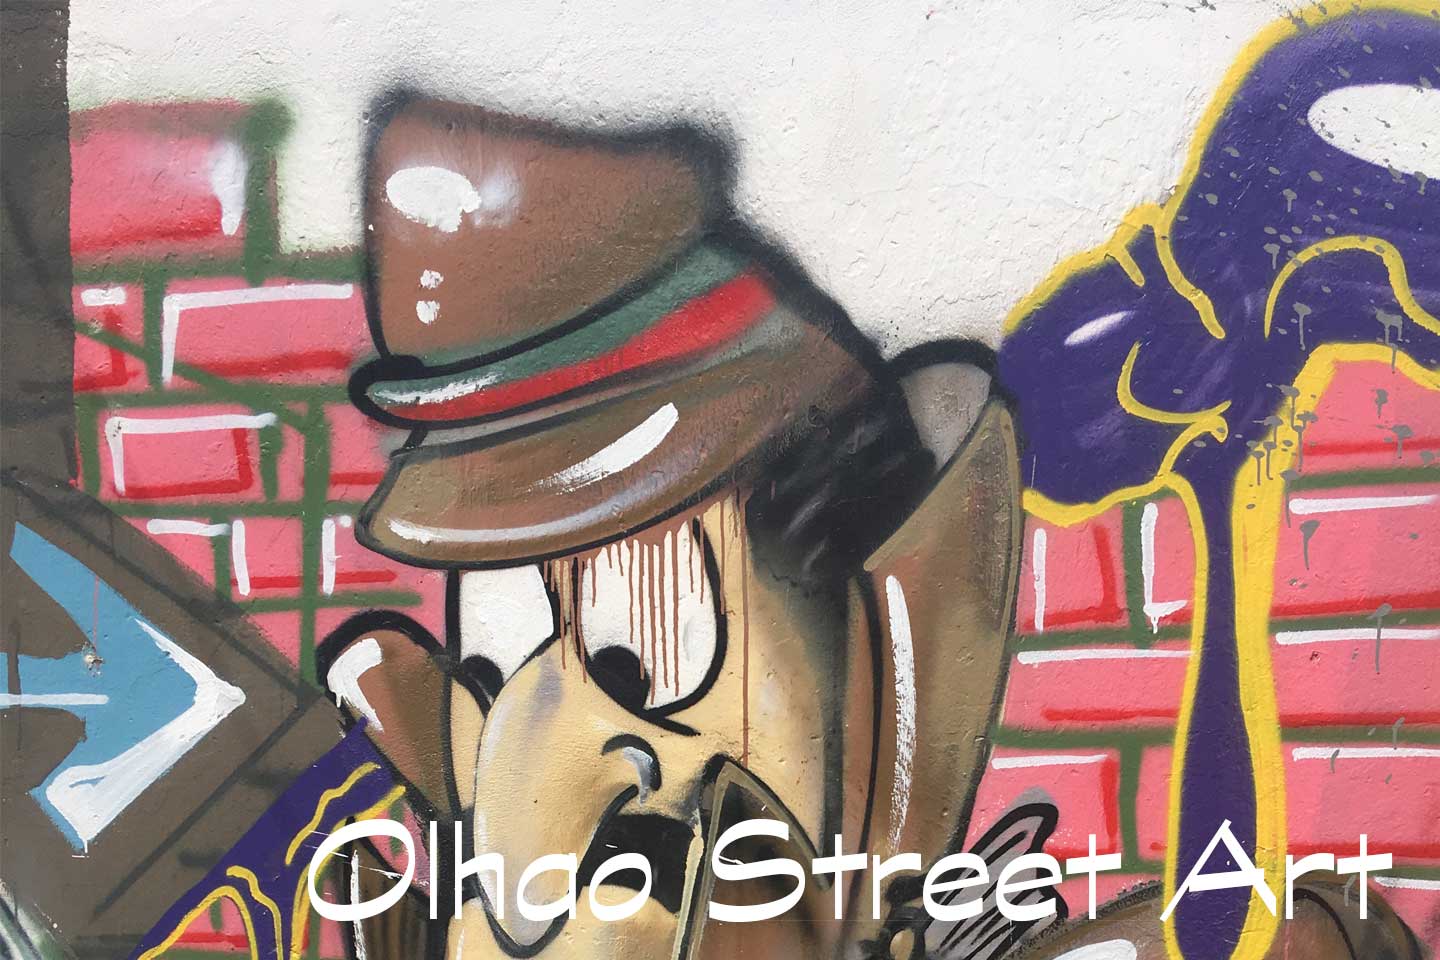 A Photo of Olhao Street Art - a cartoon version of Inspector Clouseau maybe?s